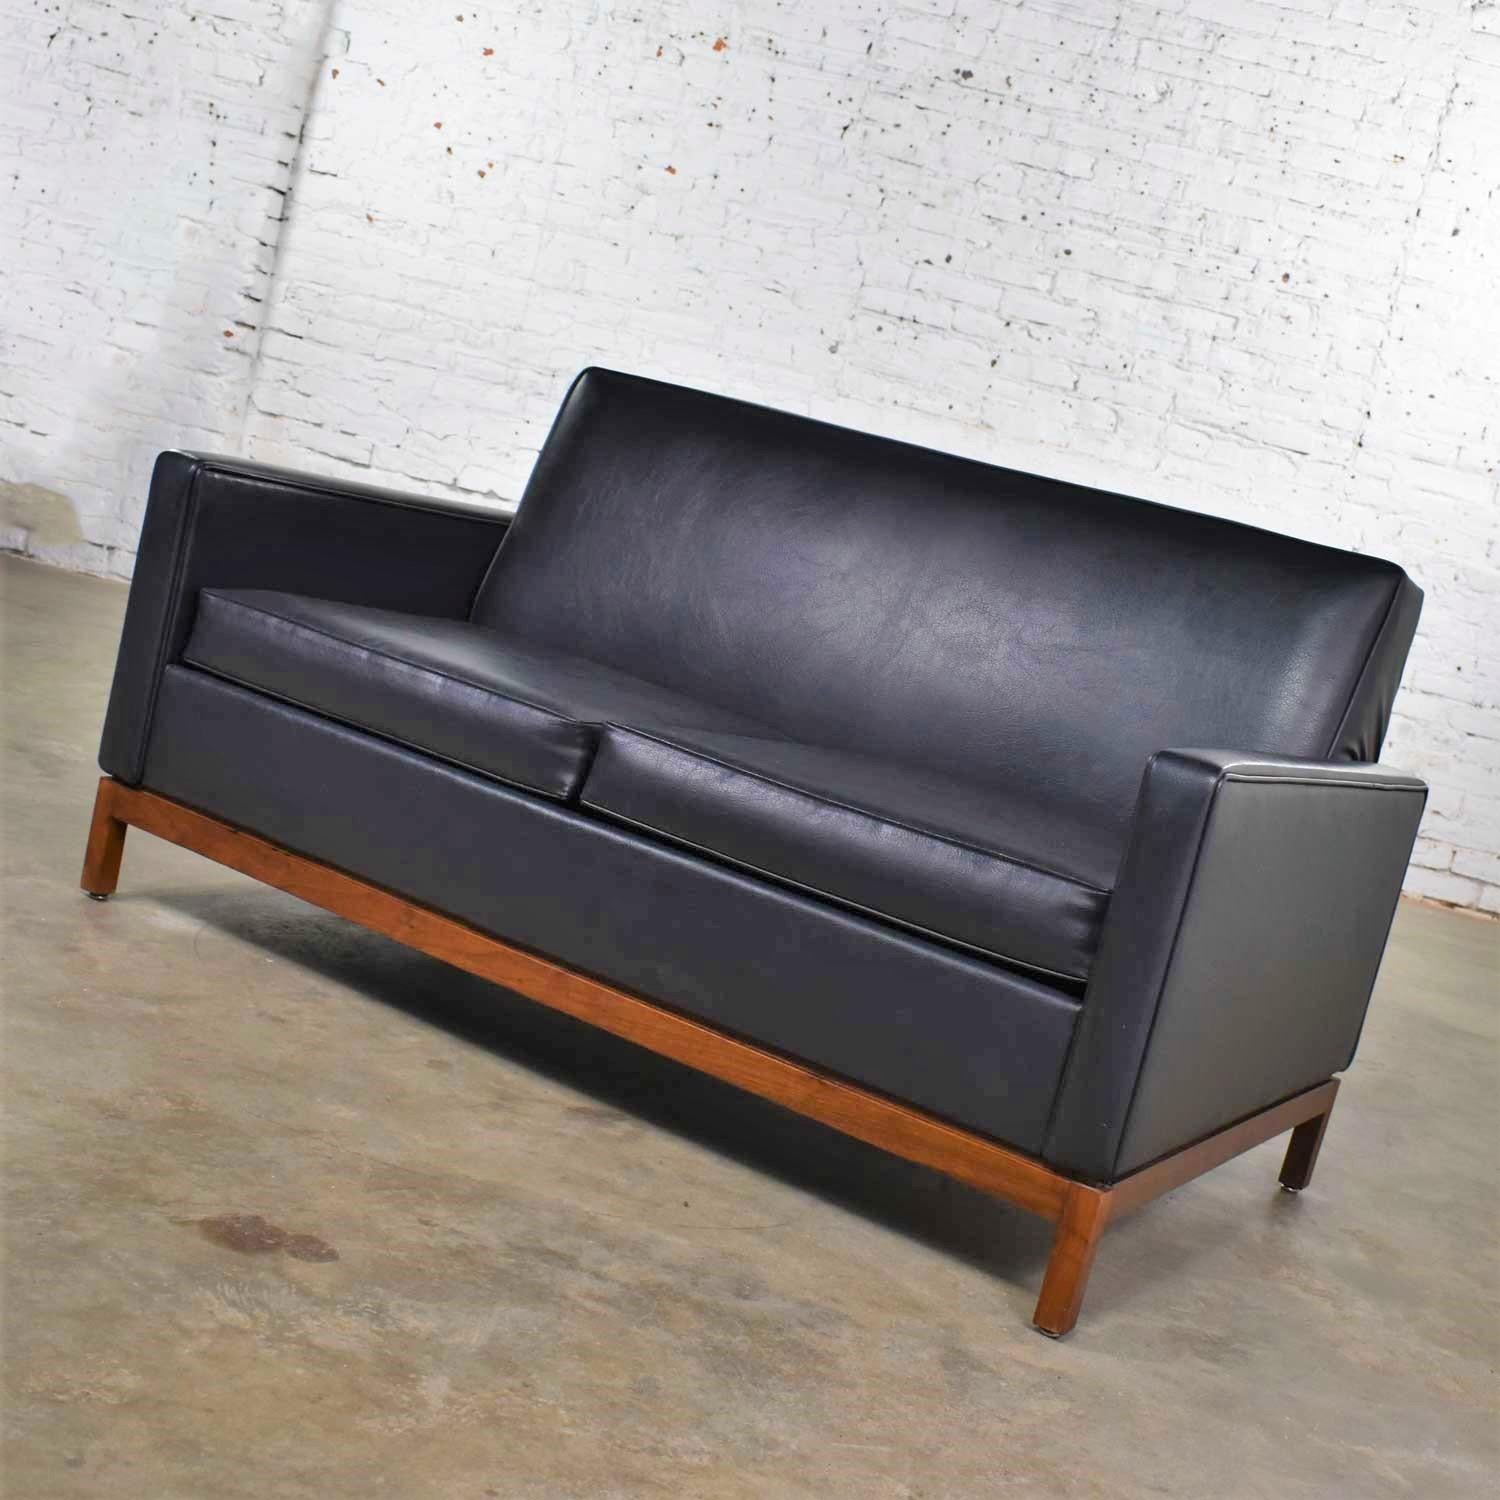 Handsome Mid-Century Modern love seat length sofa in black vinyl faux leather upholstery and walnut base in the style of Wormley for Dunbar or Harvey Probber. It is in wonderful vintage condition. We believe the black vinyl to be fairly new. The